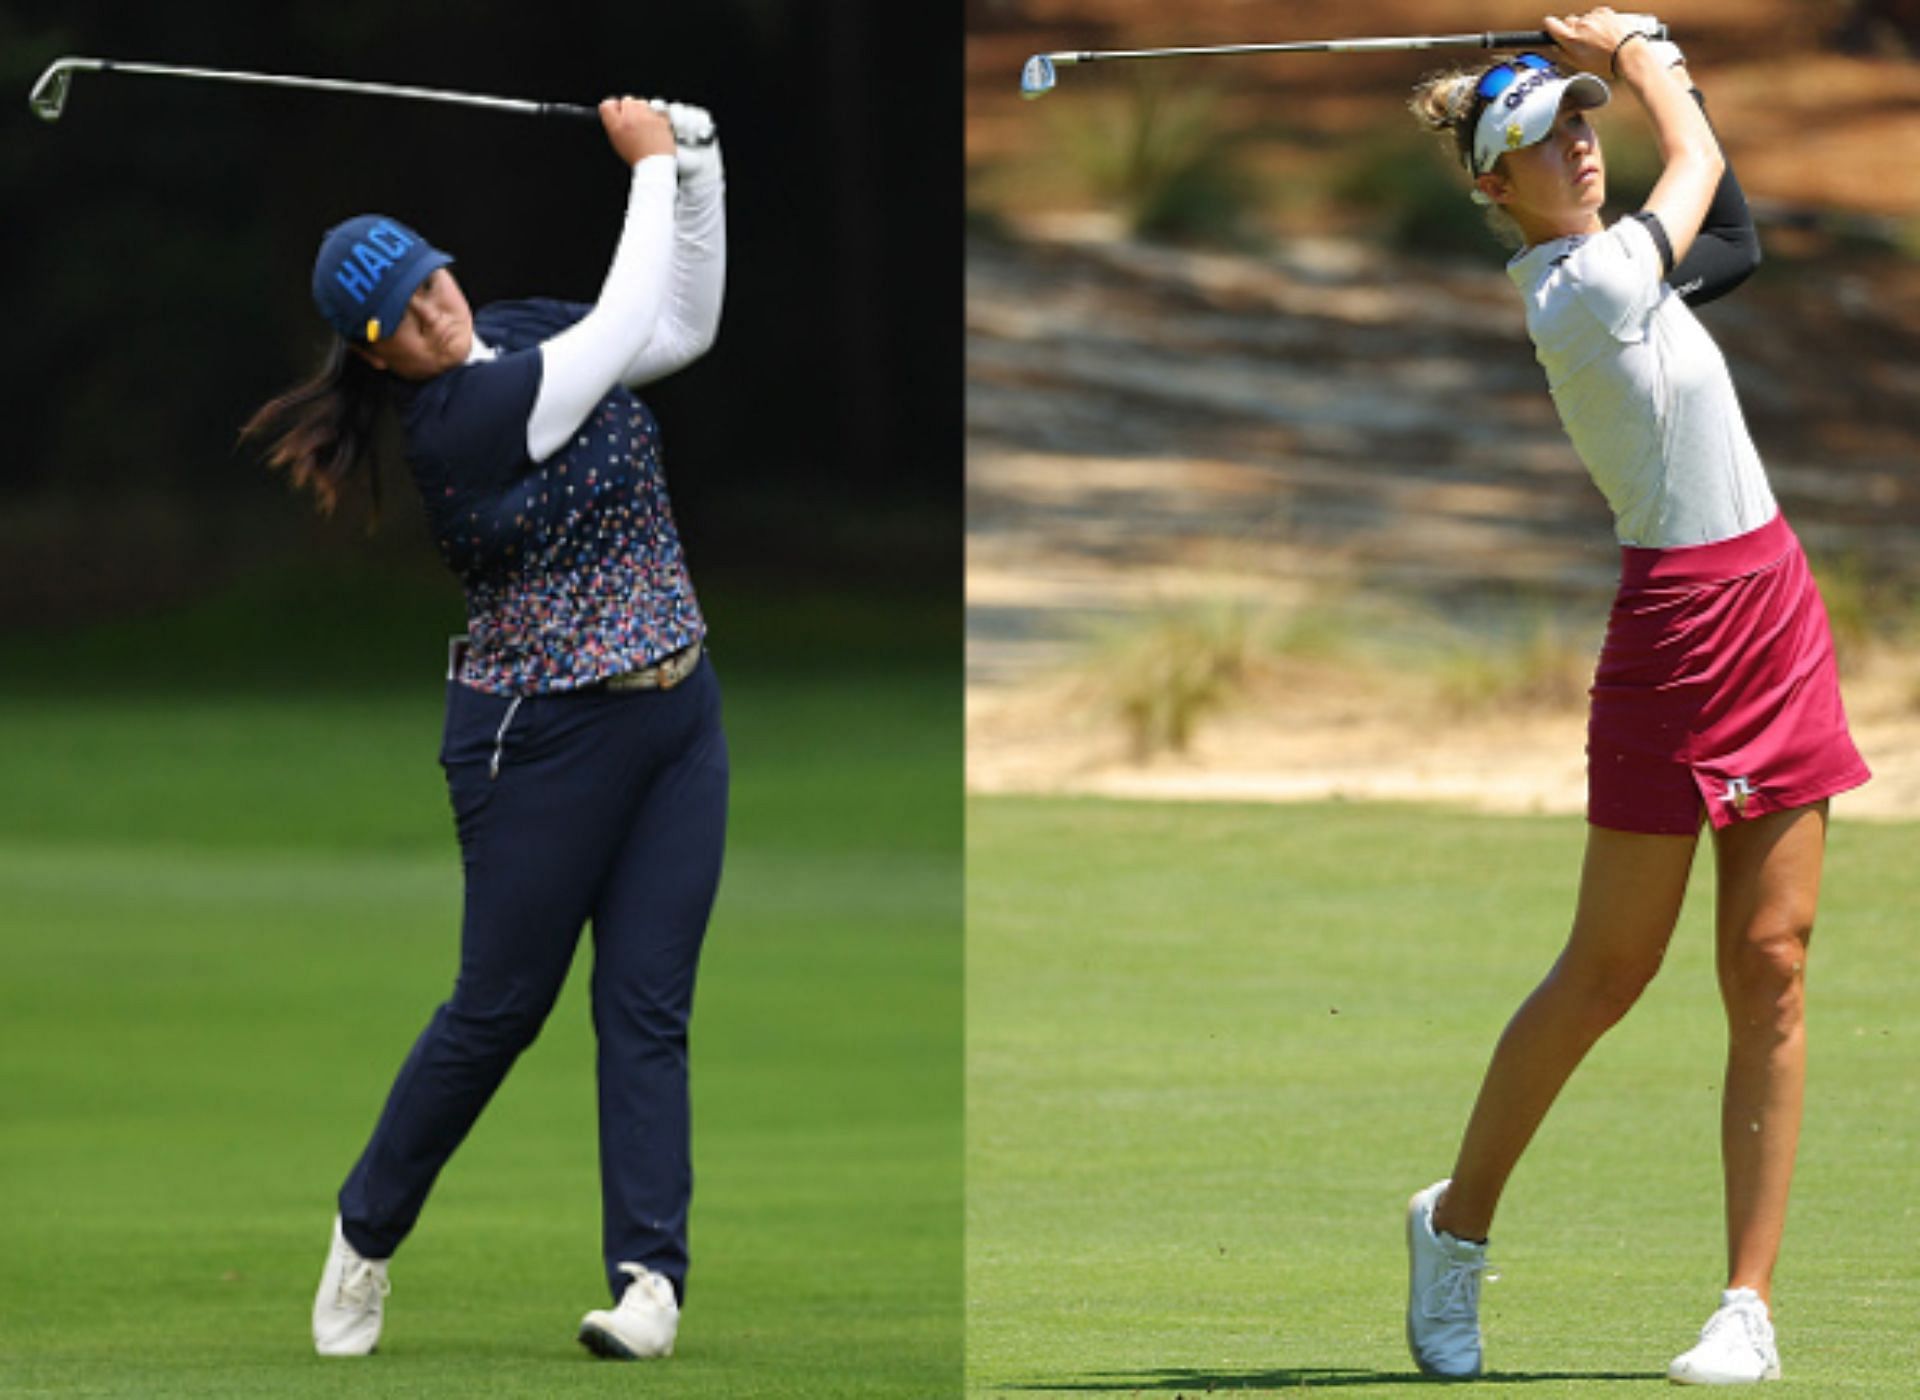 Angel Yin and Nelly Korda will be two of the top stars at the BMW Ladies Championship (Image via Getty).